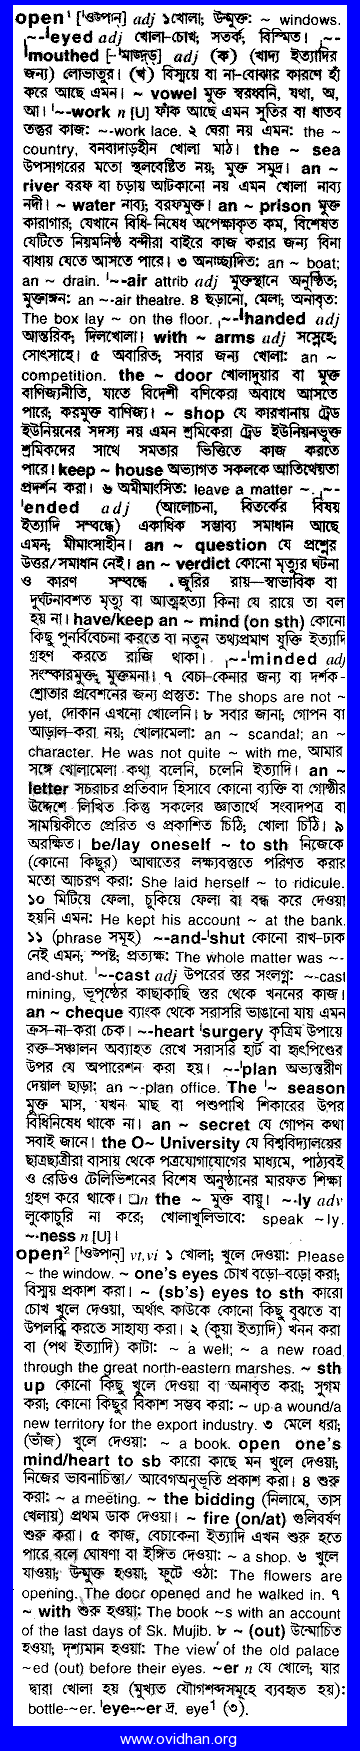 Meaning of opening with pronunciation - English 2 Bangla / English  Dictionary